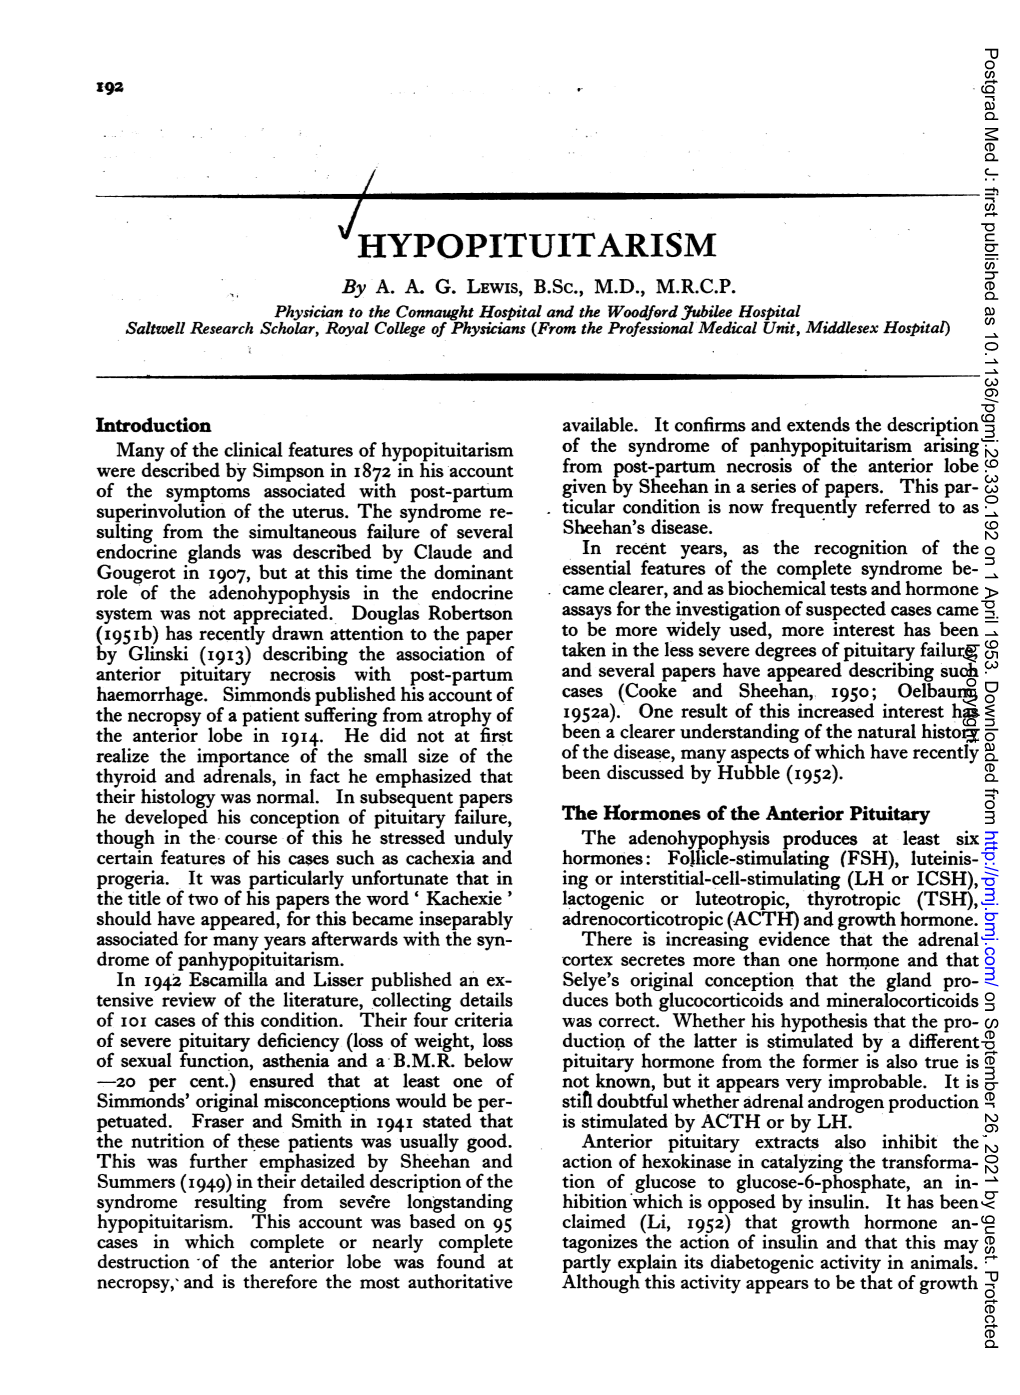 HYPOPITUITARISM by A